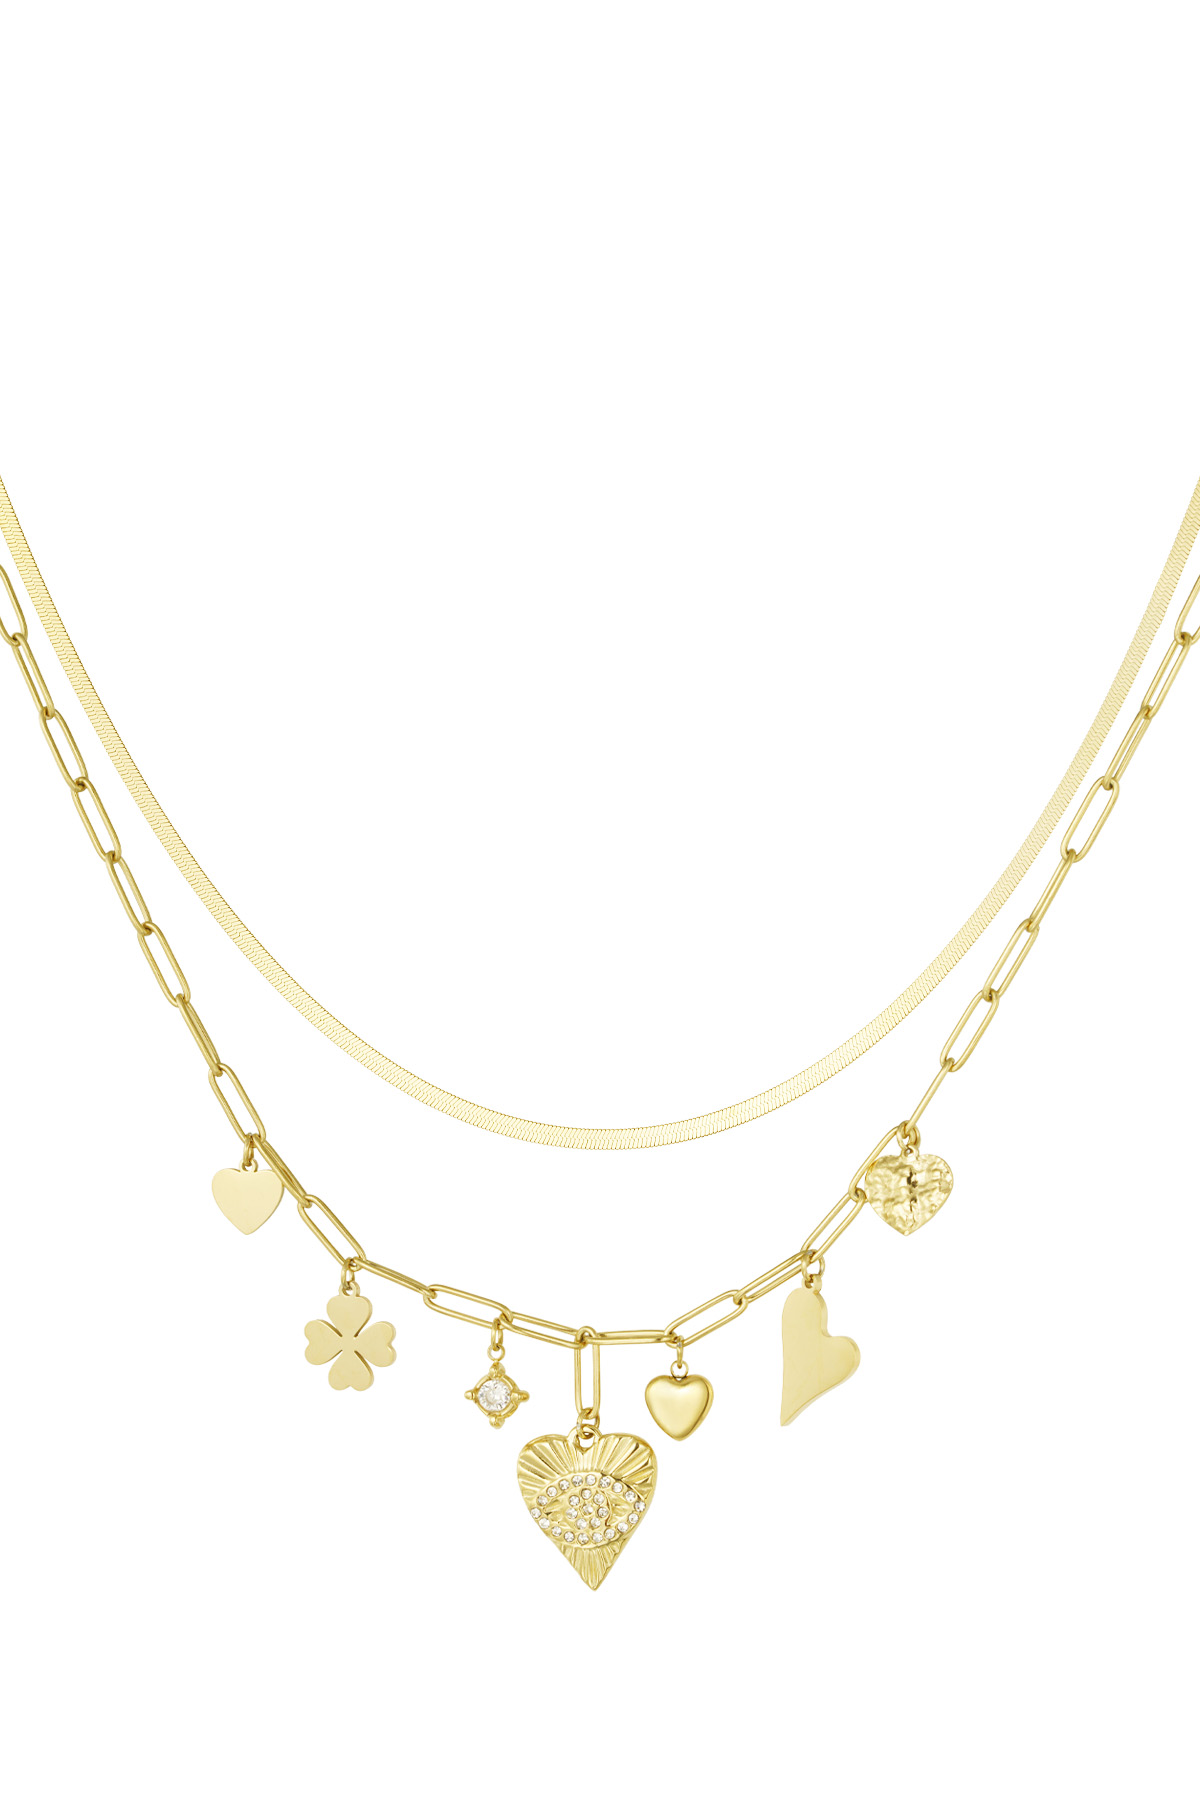 Charm necklace lucky number 7 - gold